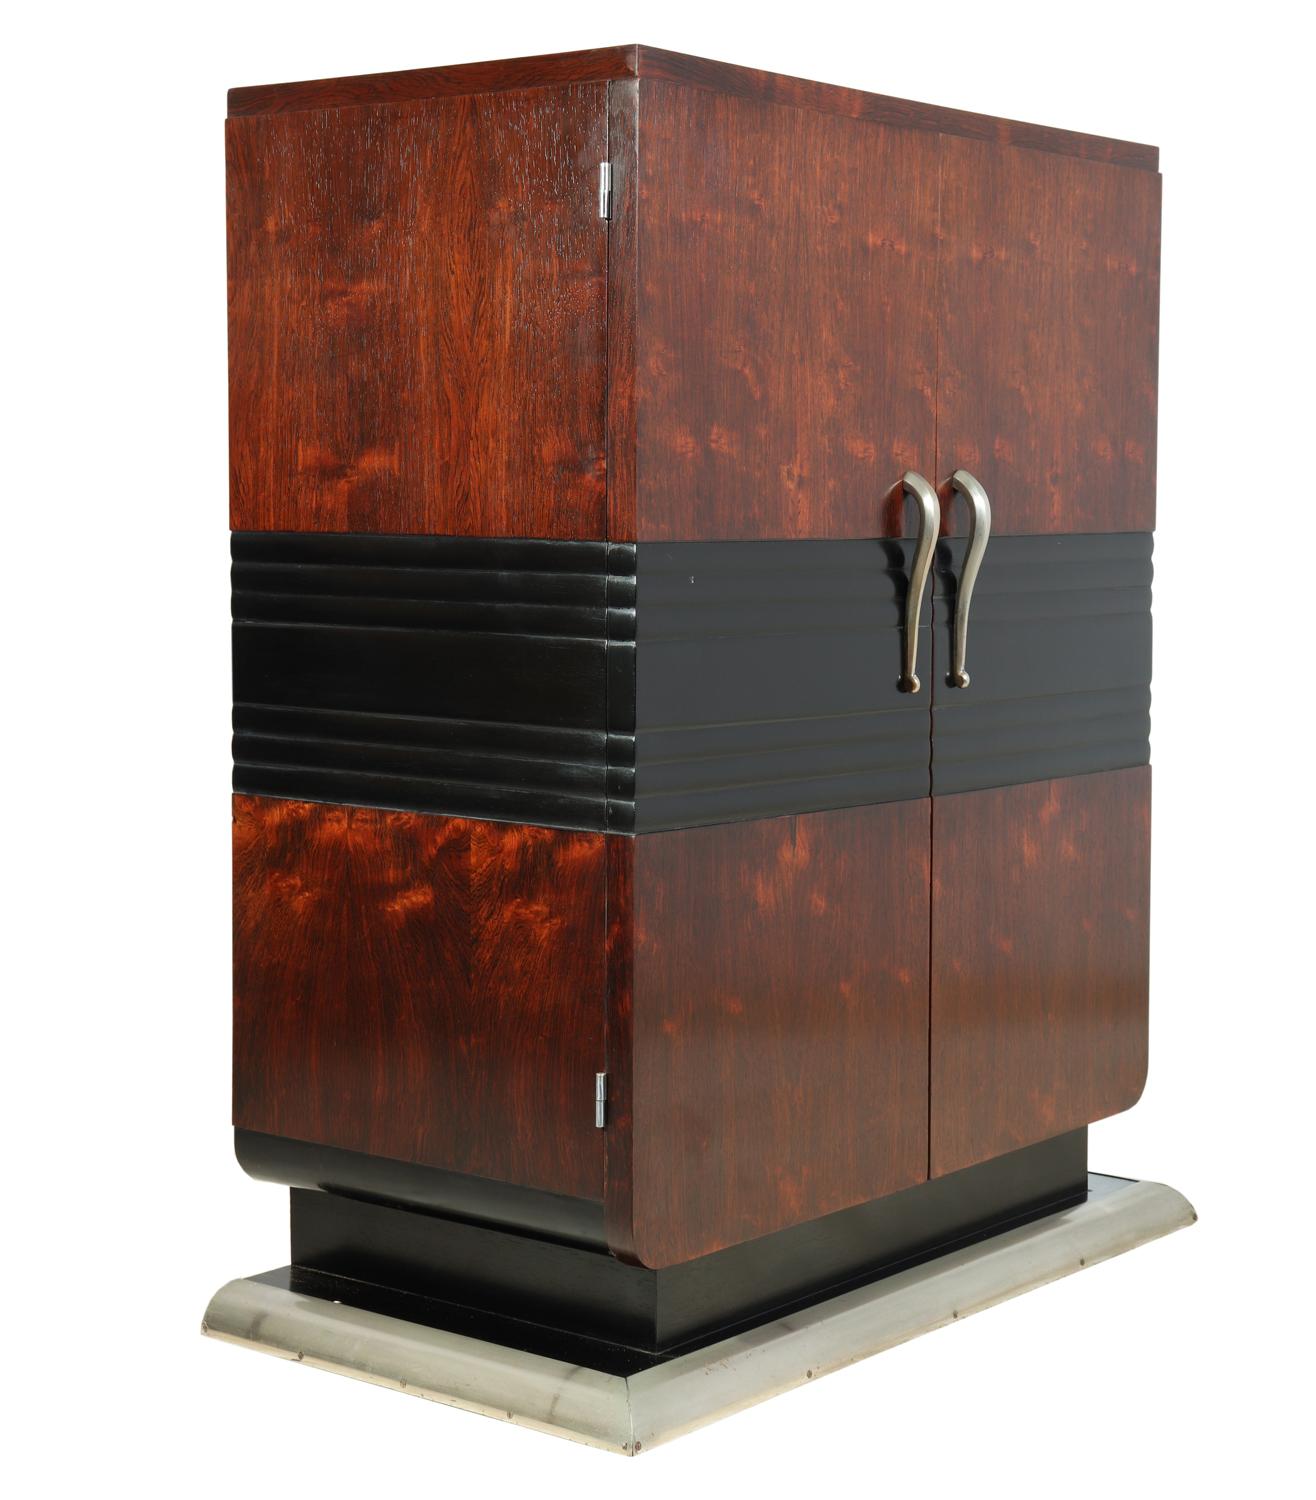 French Art Deco rosewood cocktail cabinet, circa 1930
Original, French Art Deco Rosewood 2-door cocktail cabinet from the 1930's. This cabinet has a central fluted ebonised band, pewter handles and matching base trim. Inside there is a pullout /